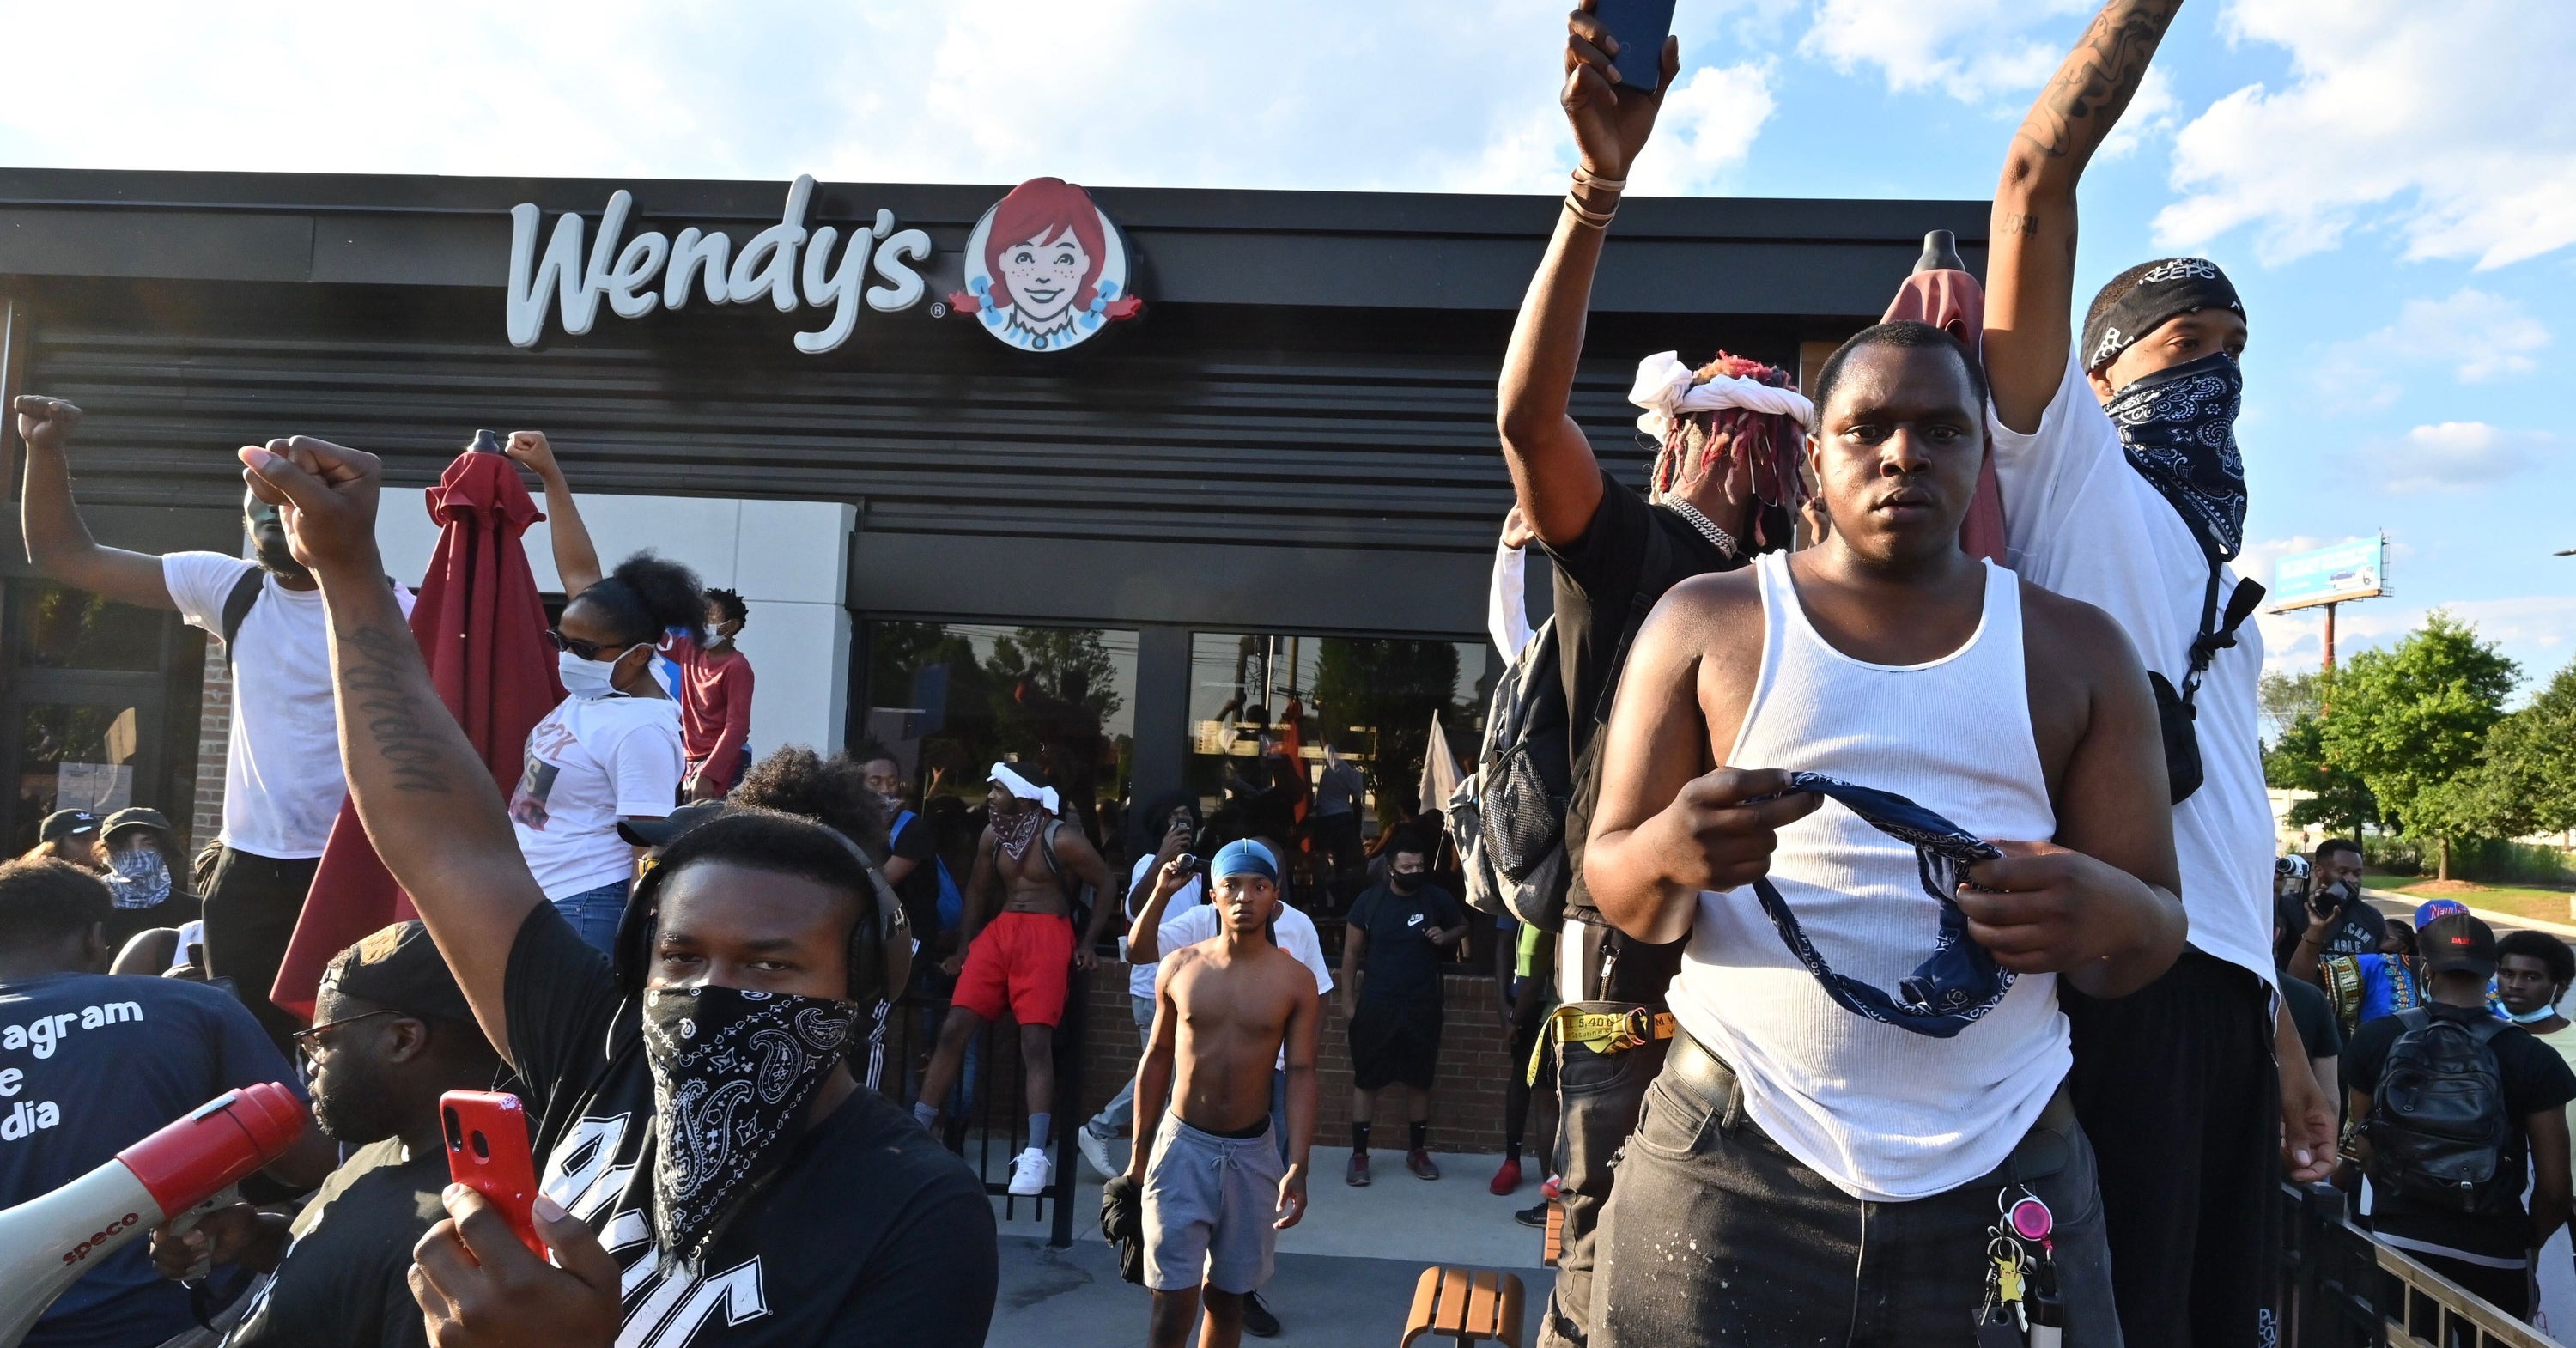 A 27-Year-Old Black Man Was Shot And Killed By Police After They Found Him Asleep In A Car At A Wendy's